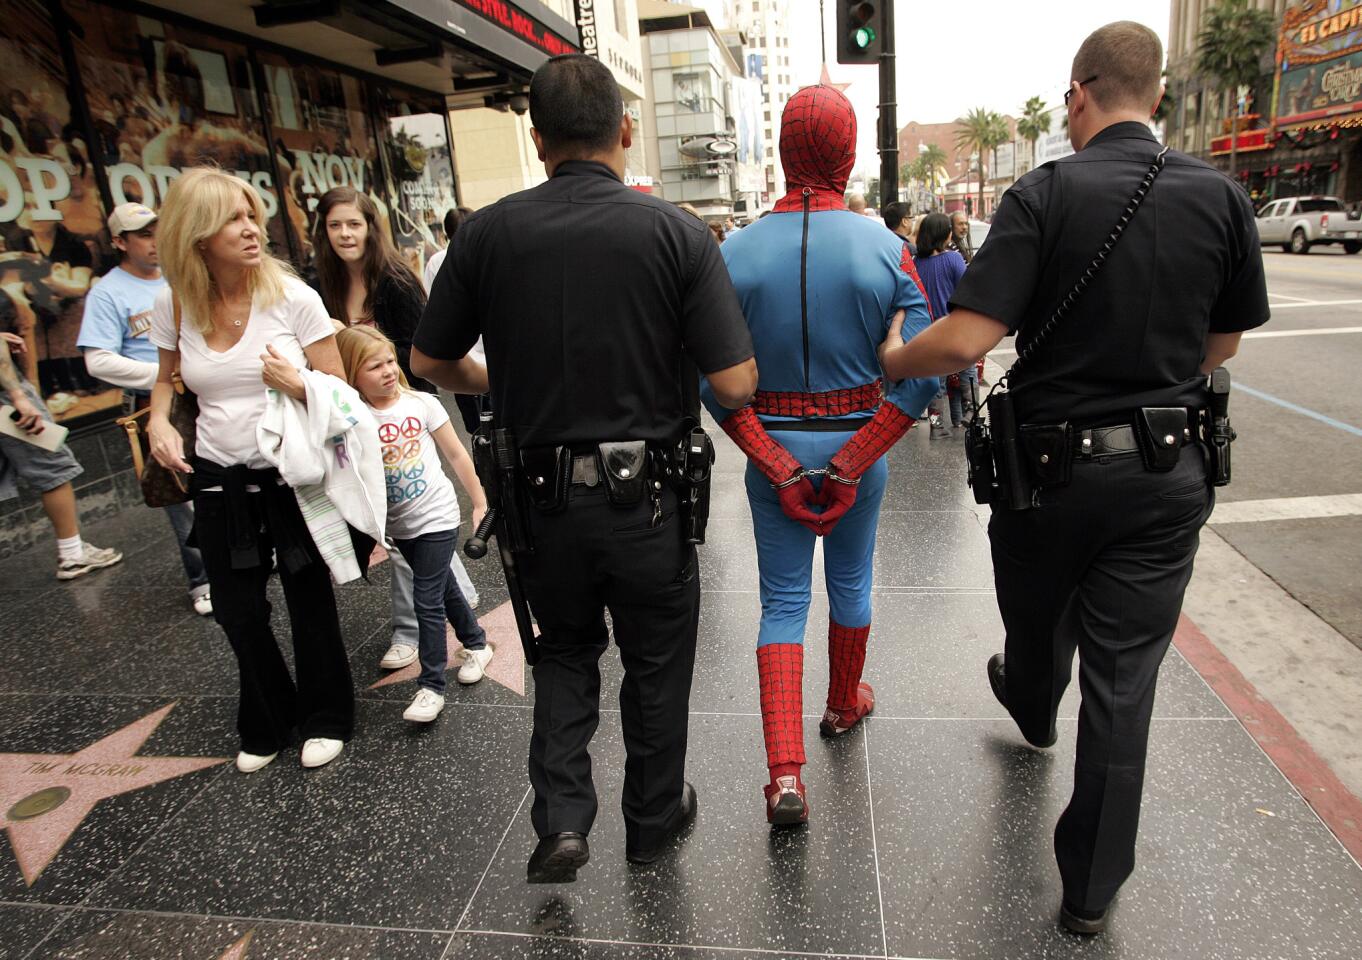 Officers from the Los Angeles Police Department arrest a man in a Spider-Man outfit after he allegedly assaulted a man on Hollywood Boulevard in 2009.